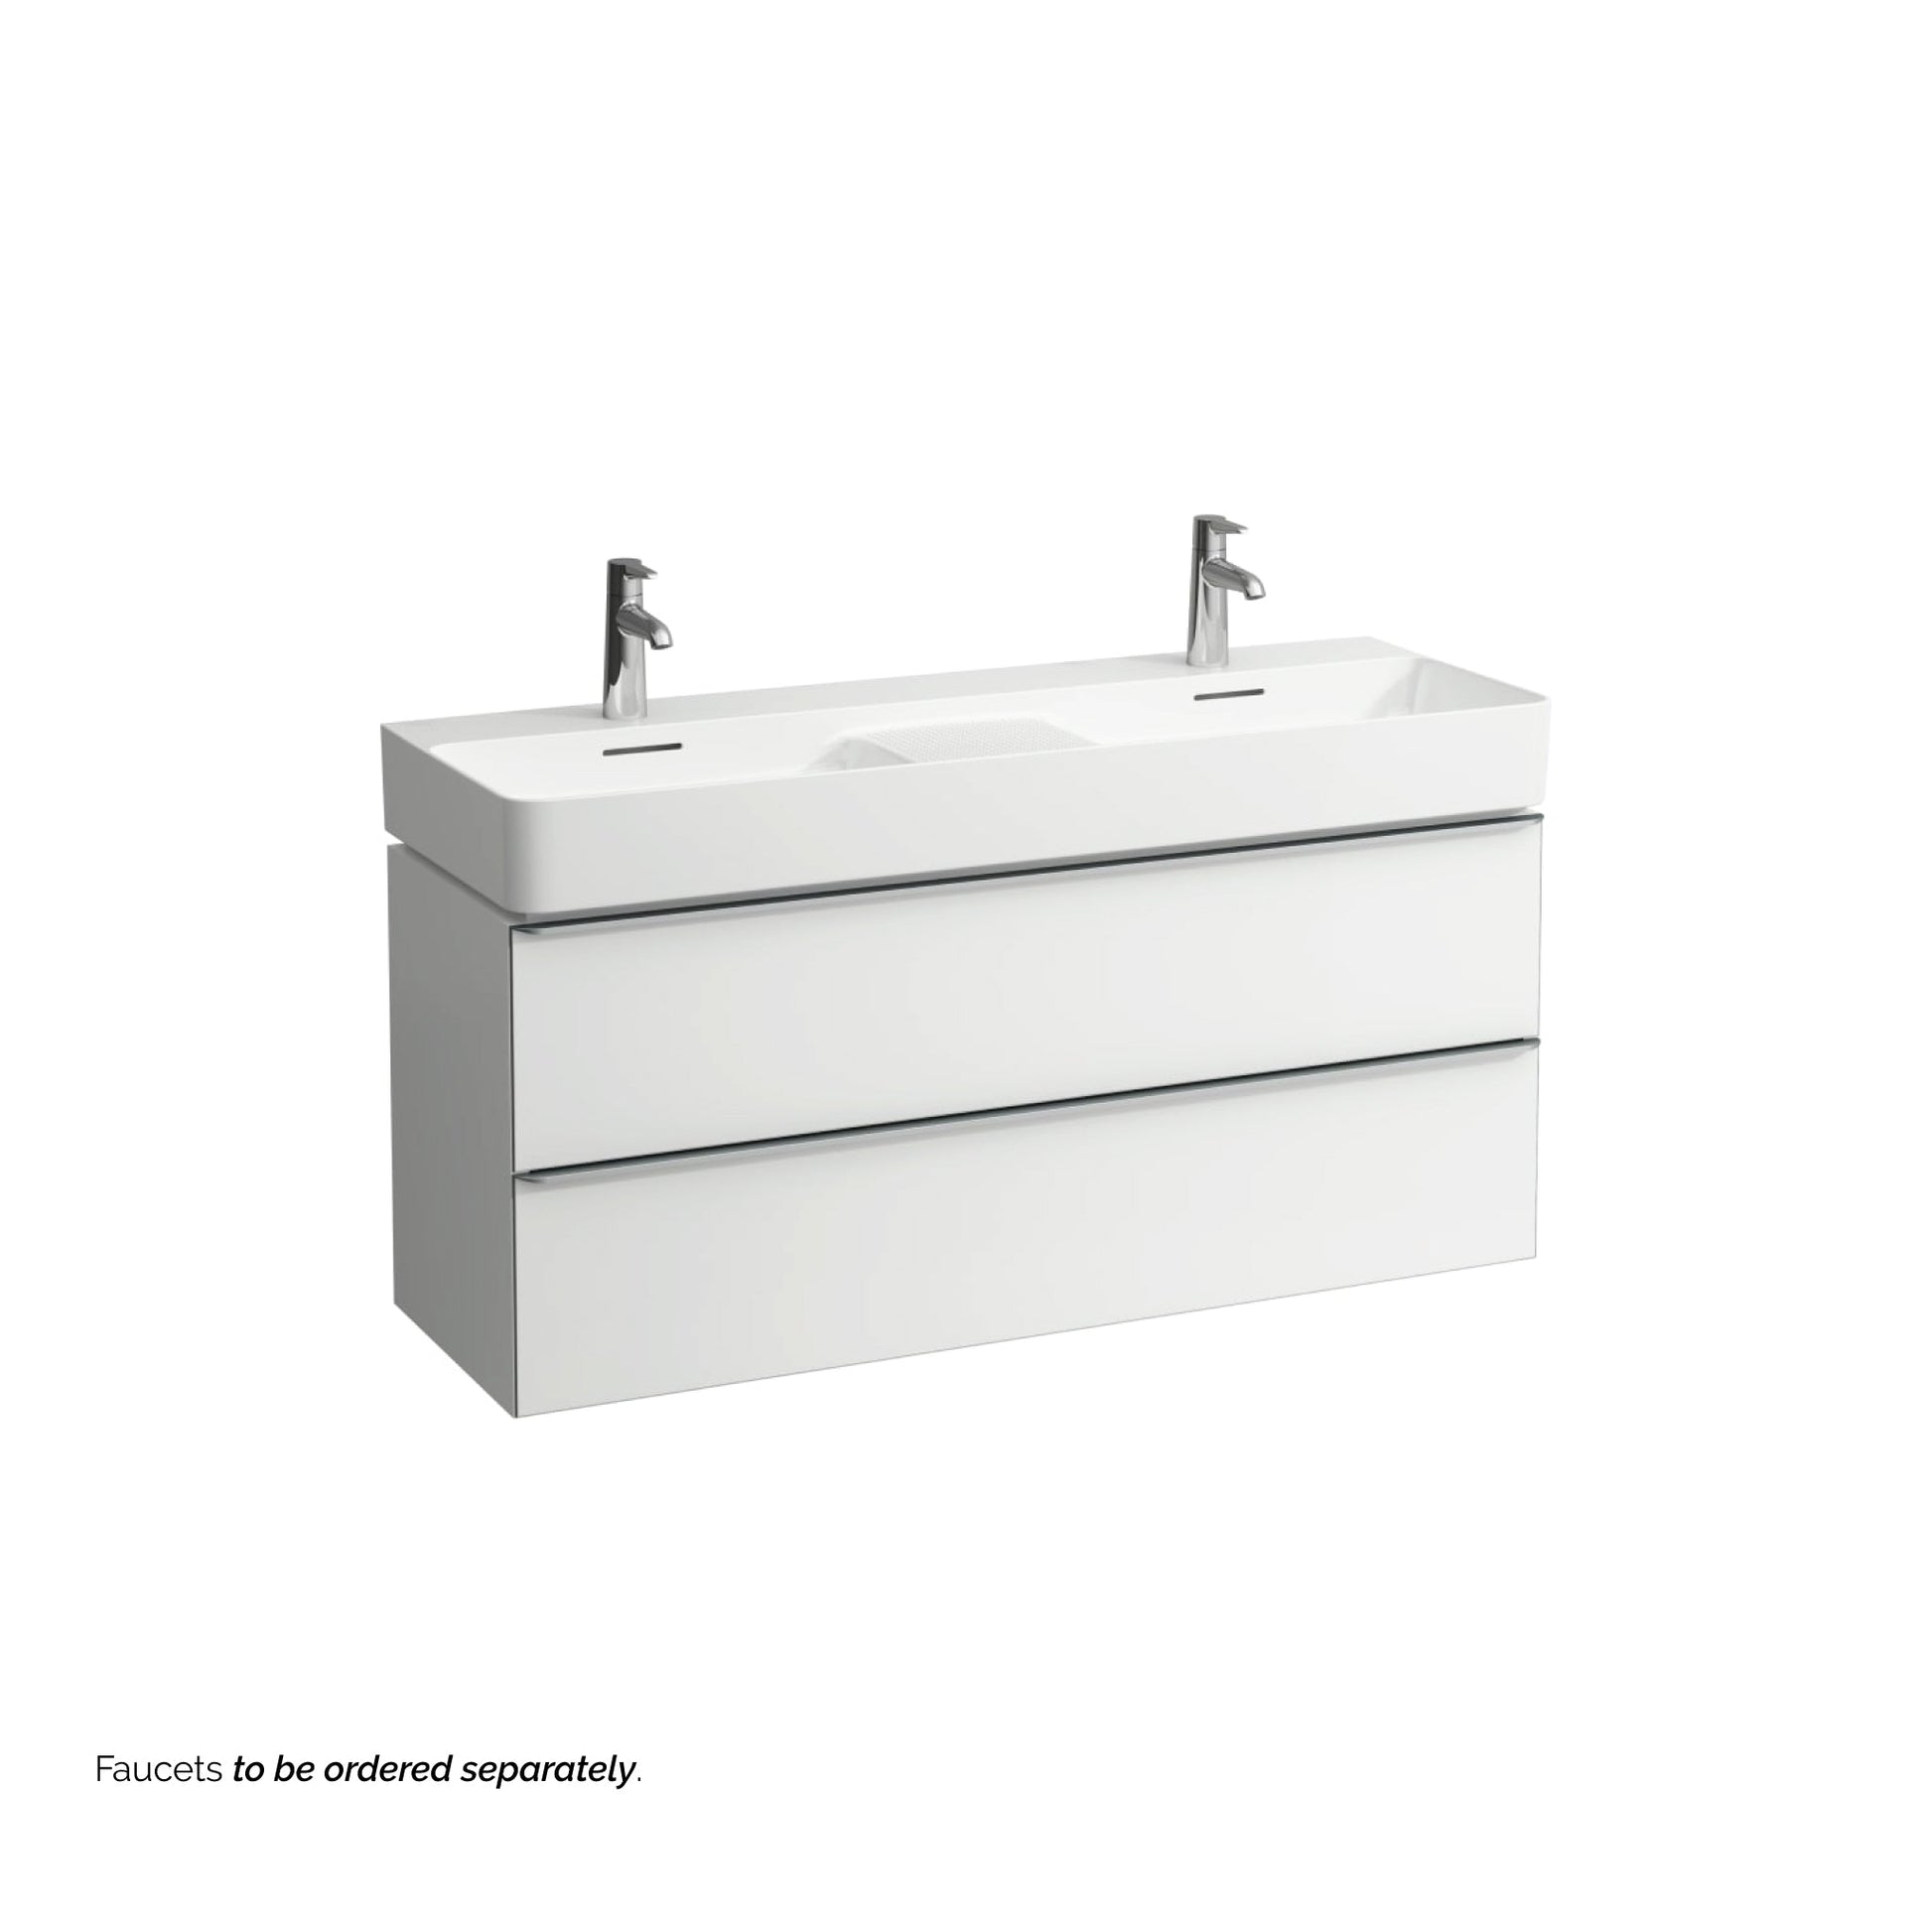 Laufen Val 47" x 17" White Ceramic Wall-Mounted Double Bathroom Sink With 2 Faucet Holes